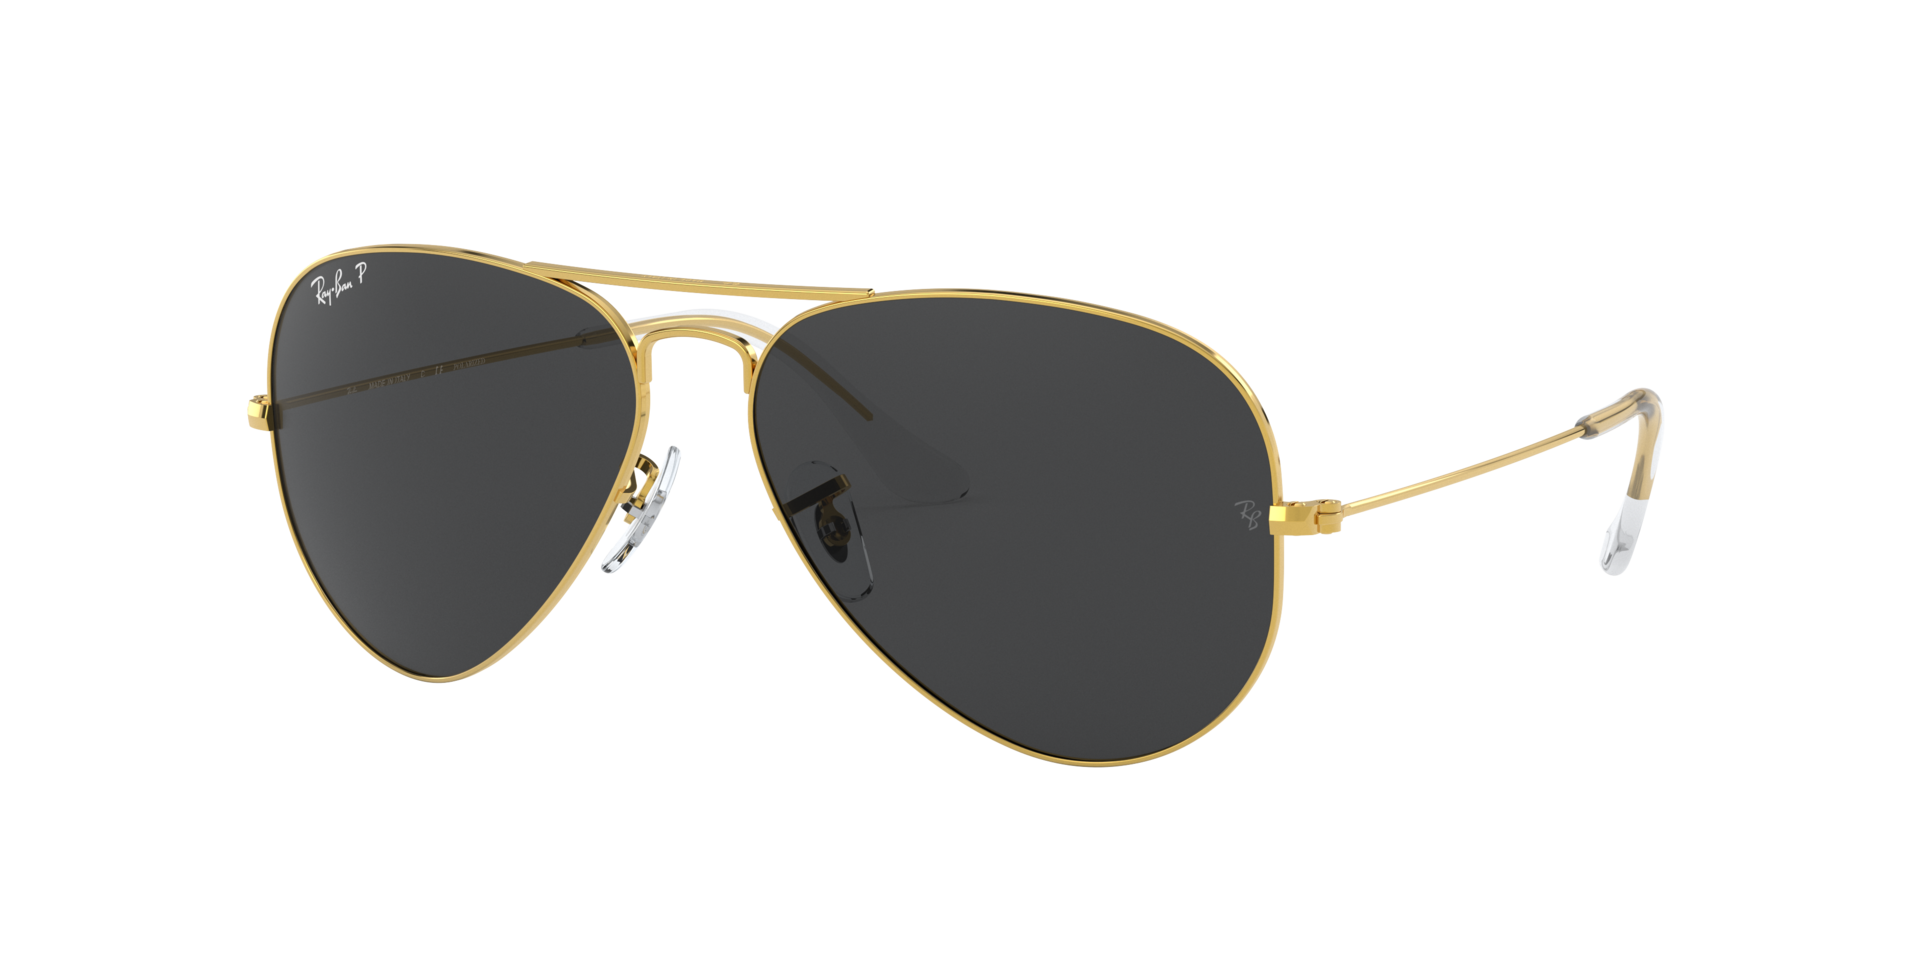 Ray-Ban Aviator Large Metal Sonnenbrille RB3025 919648 62